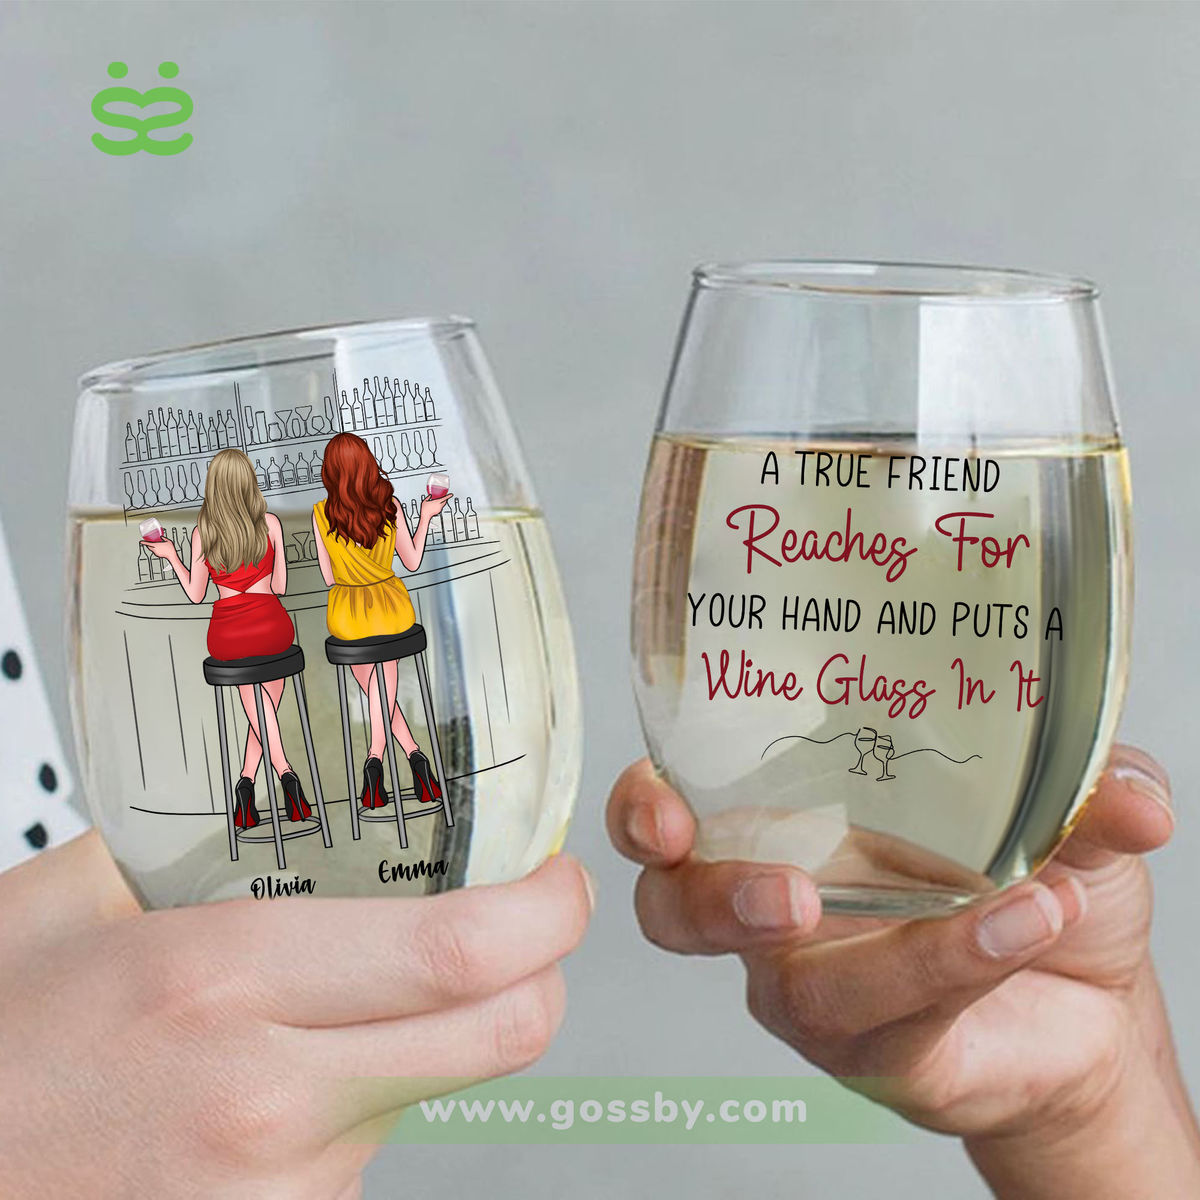 Wine Glass - A true friend reaches for your hand and puts a wine glass in it - V1